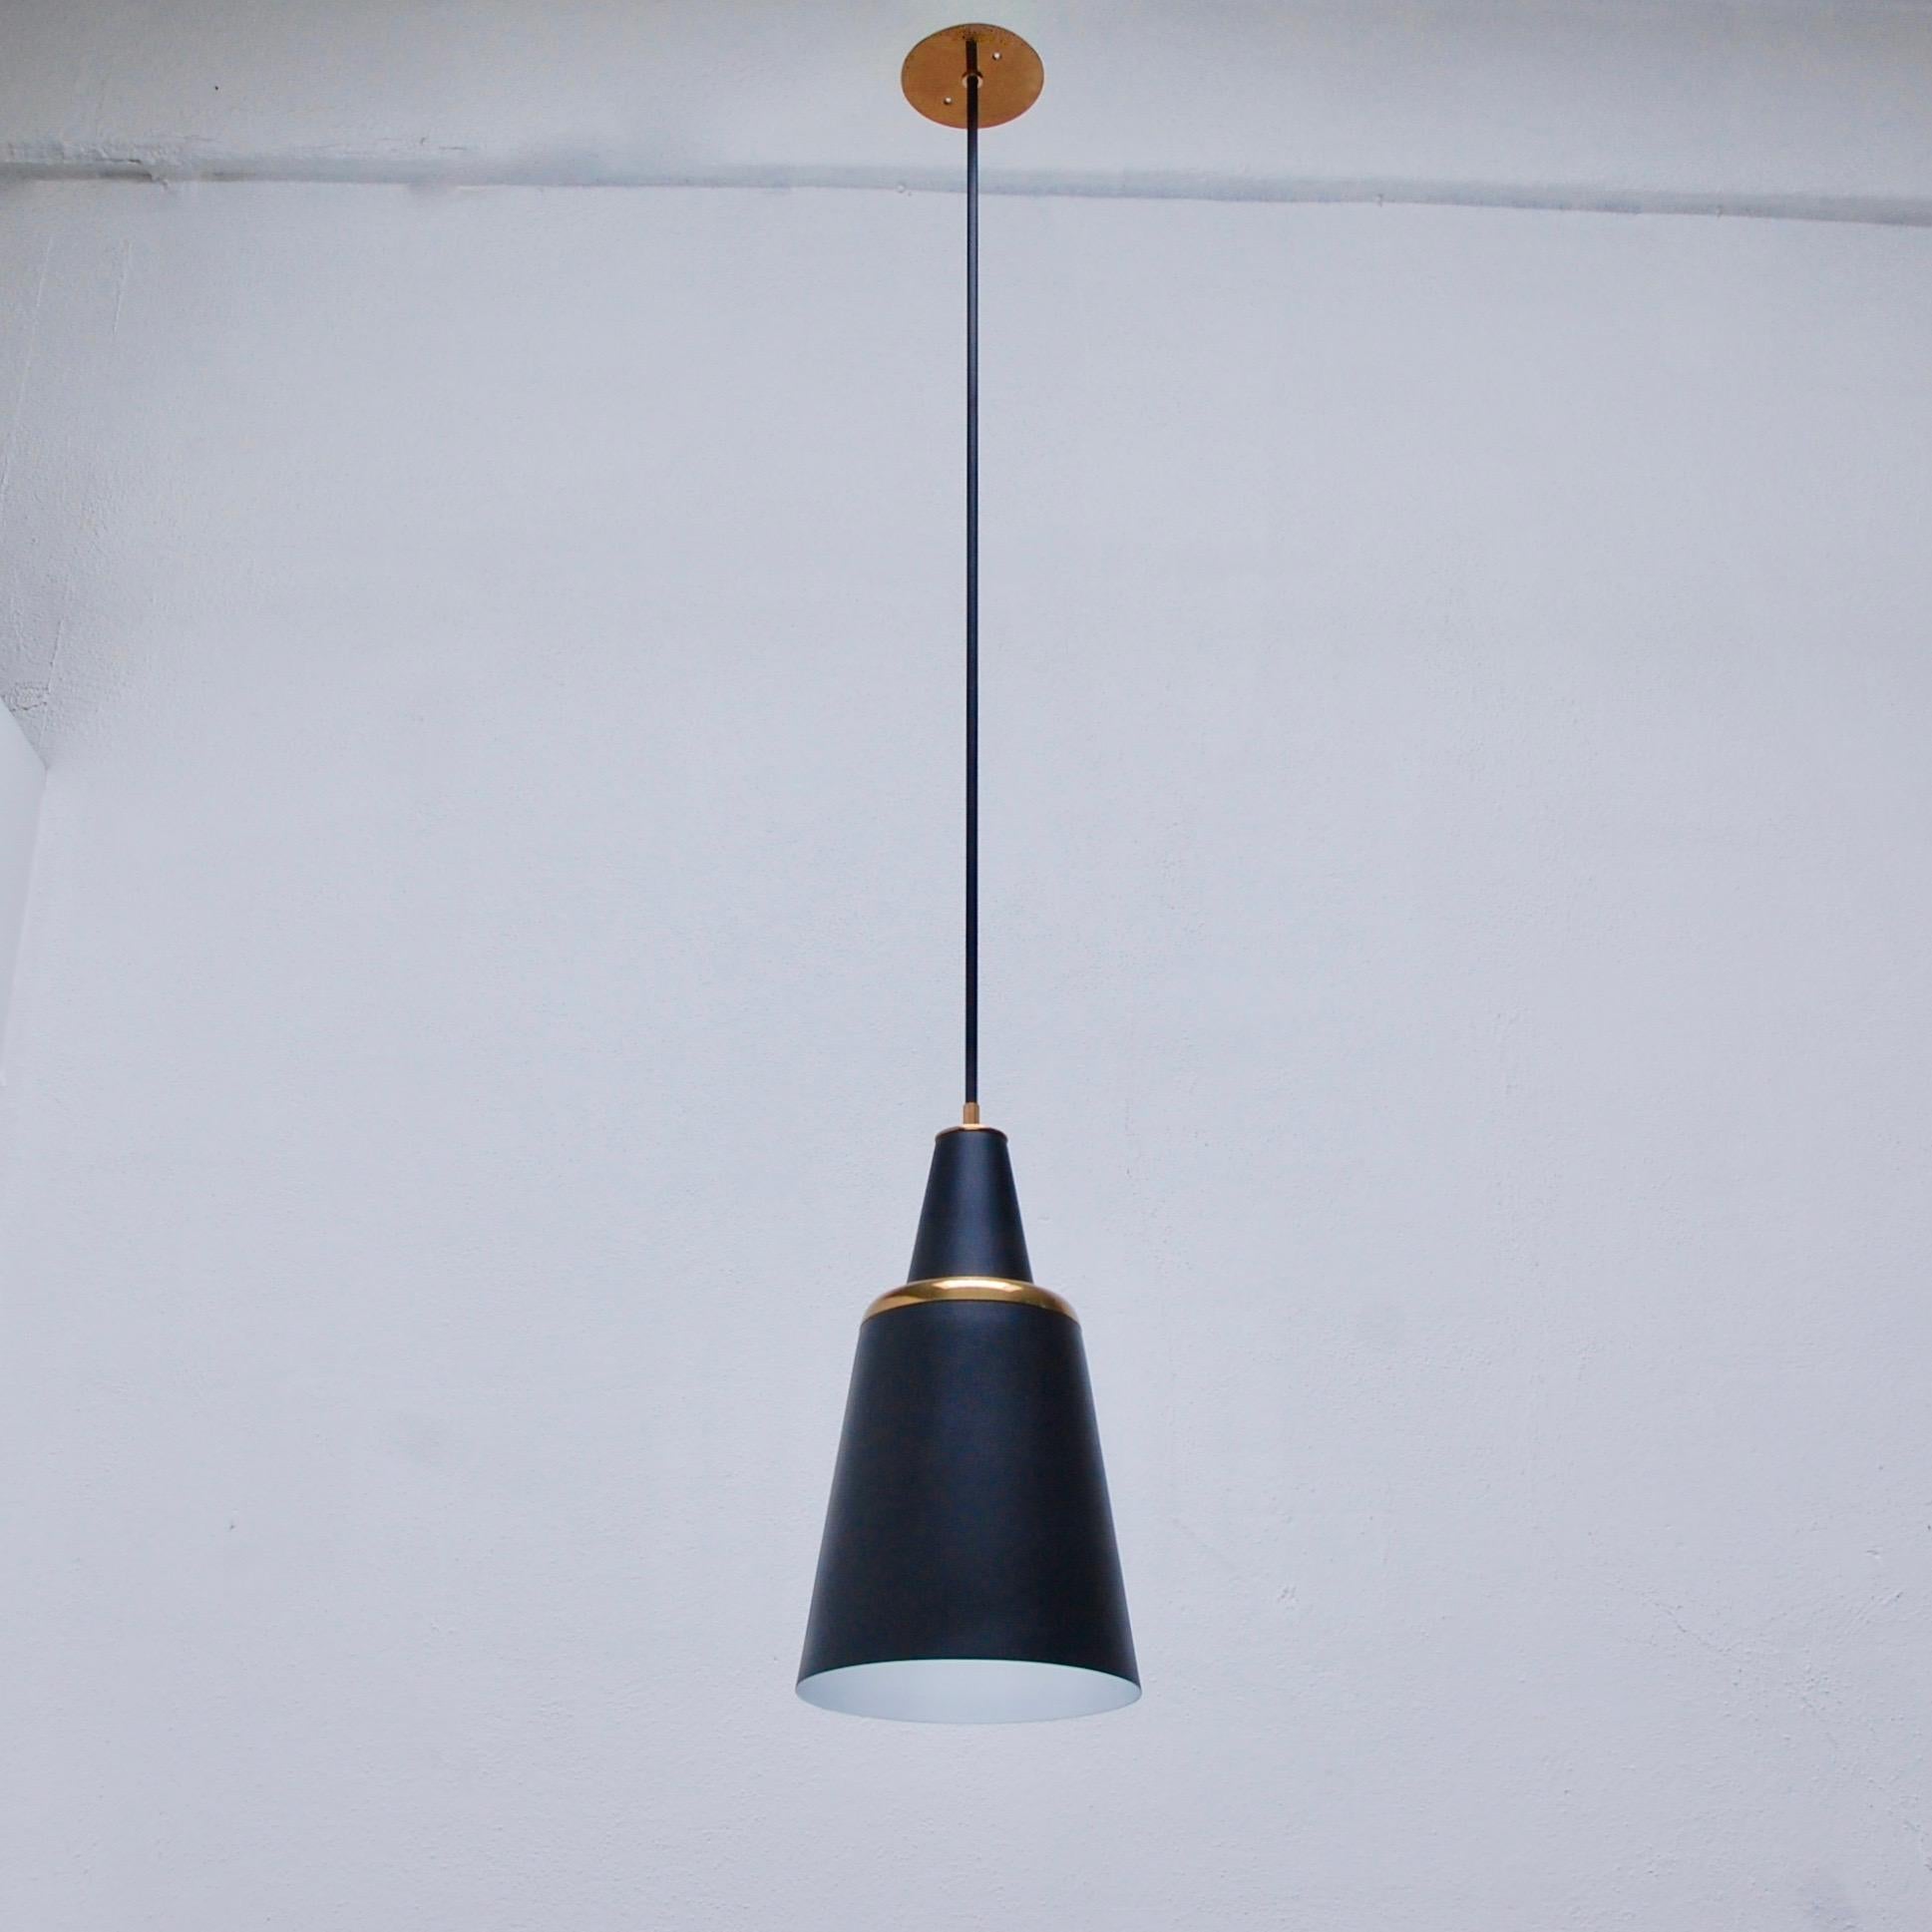 Description: Modern LUbell pendant by Lumfardo Luminaires. Made to order. Brass and painted aluminum finish. Custom finish and OAD can be made upon request. Single E26 medium based light socket per shade. Priced individually. Multiples may be